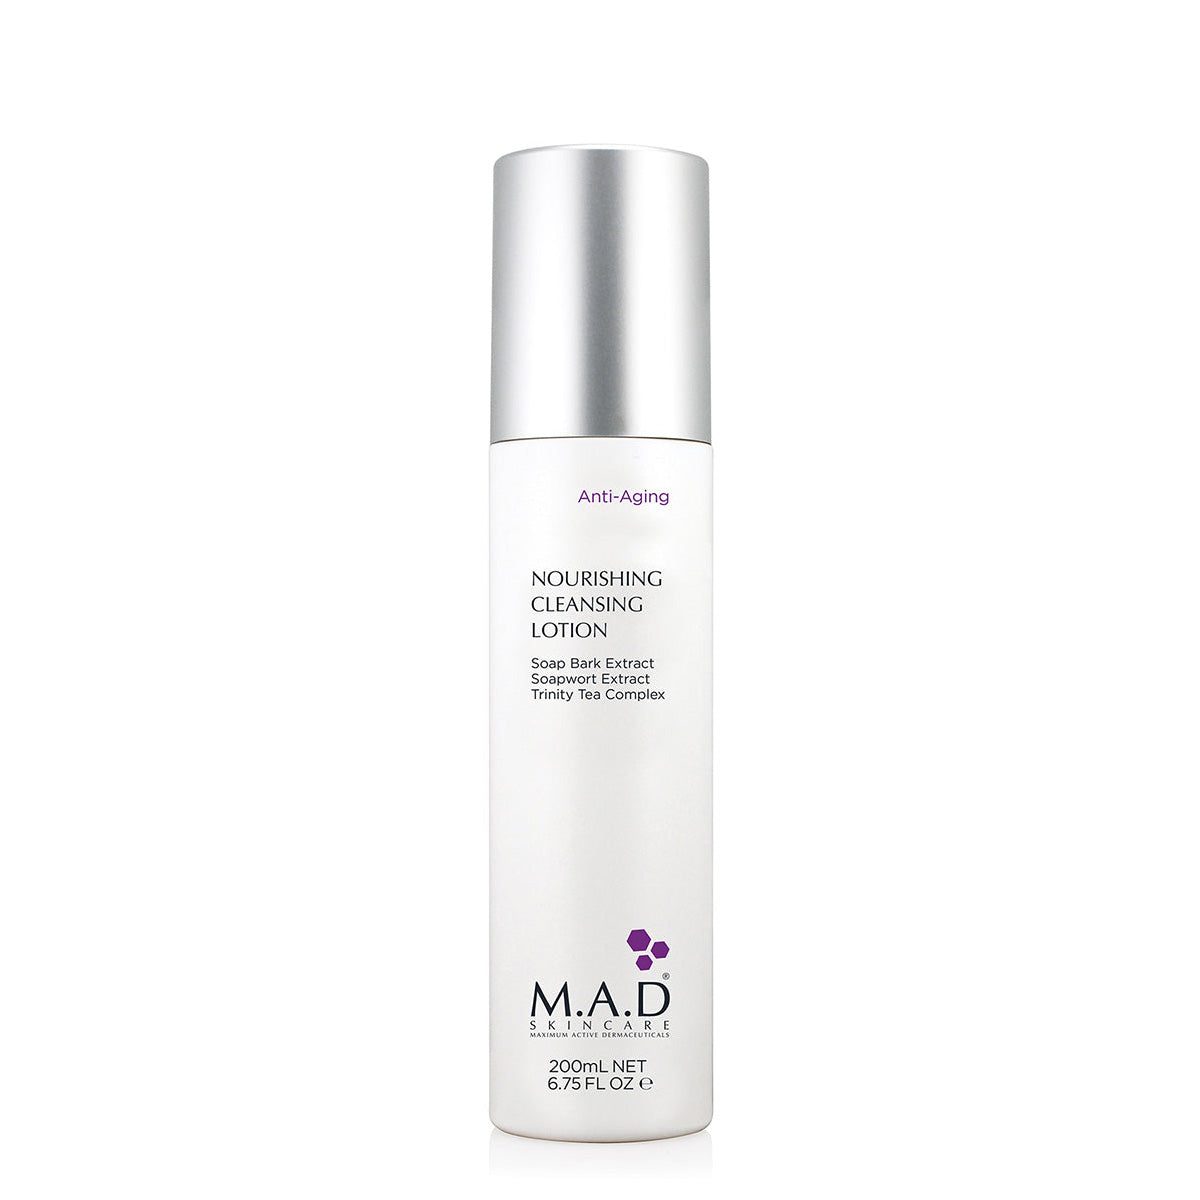 M.A.D Nourishing Cleansing Lotion